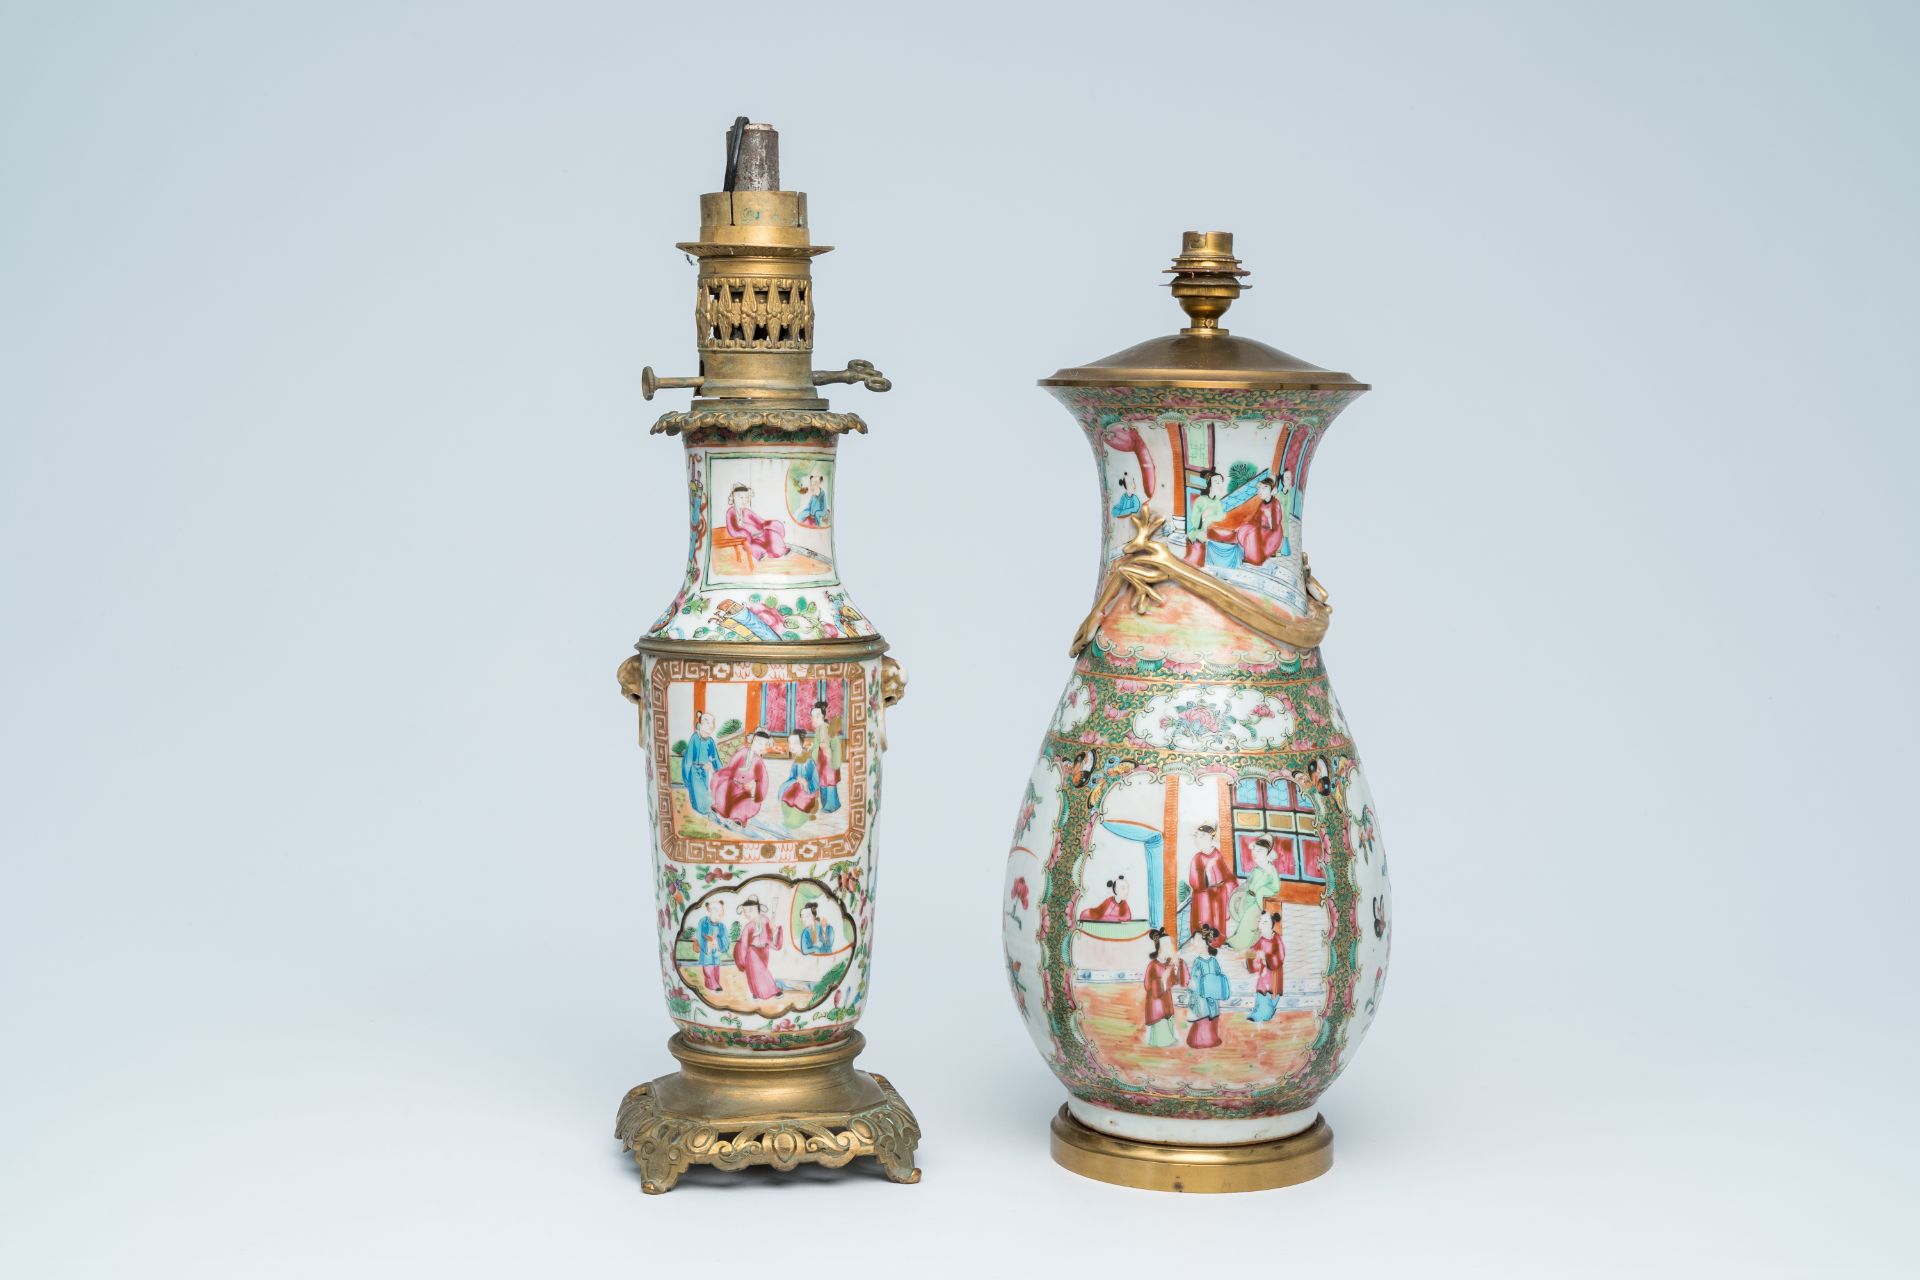 Two Chinese Canton famille rose vases with palace scenes and floral design mounted as lamps, 19th C.